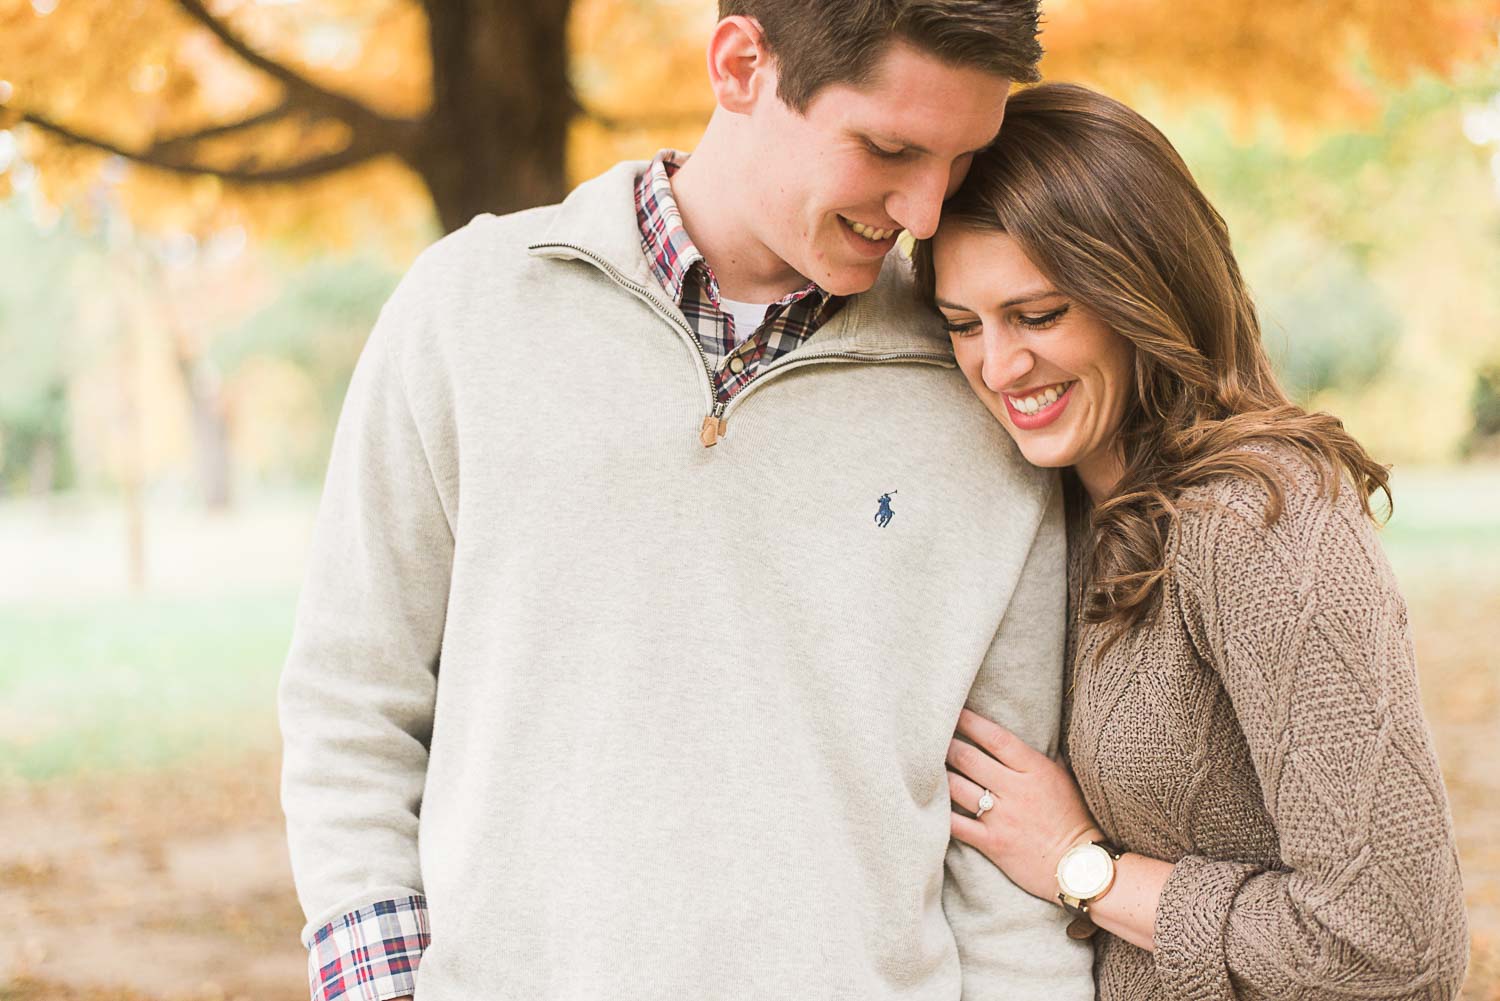 Holcomb Gardens Engagement Session, Ashley Link Photography